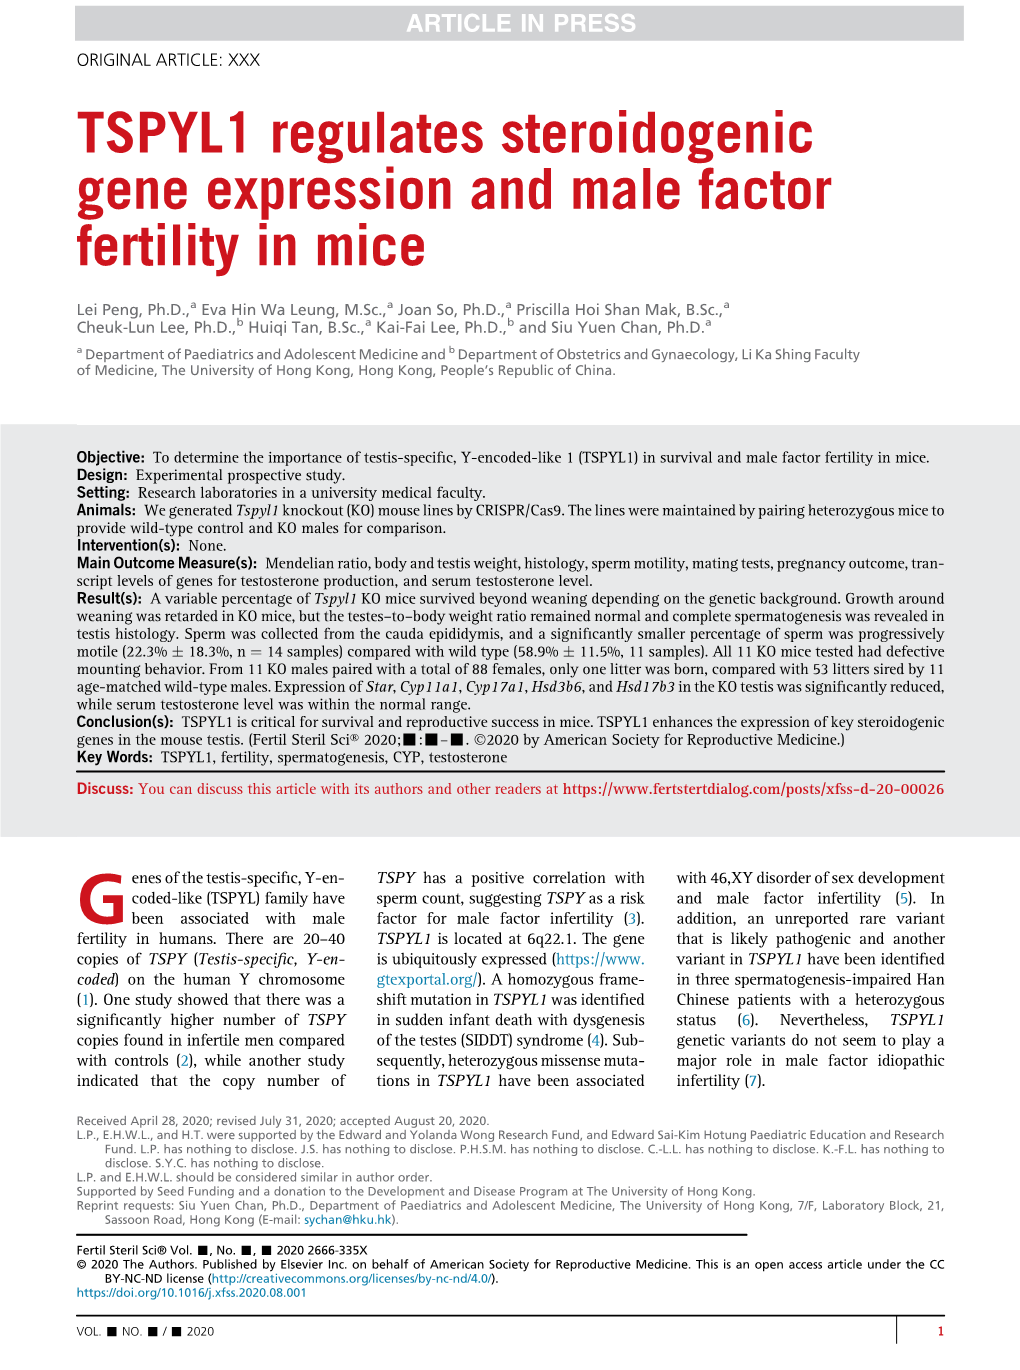 TSPYL1 Regulates Steroidogenic Gene Expression and Male Factor Fertility in Mice